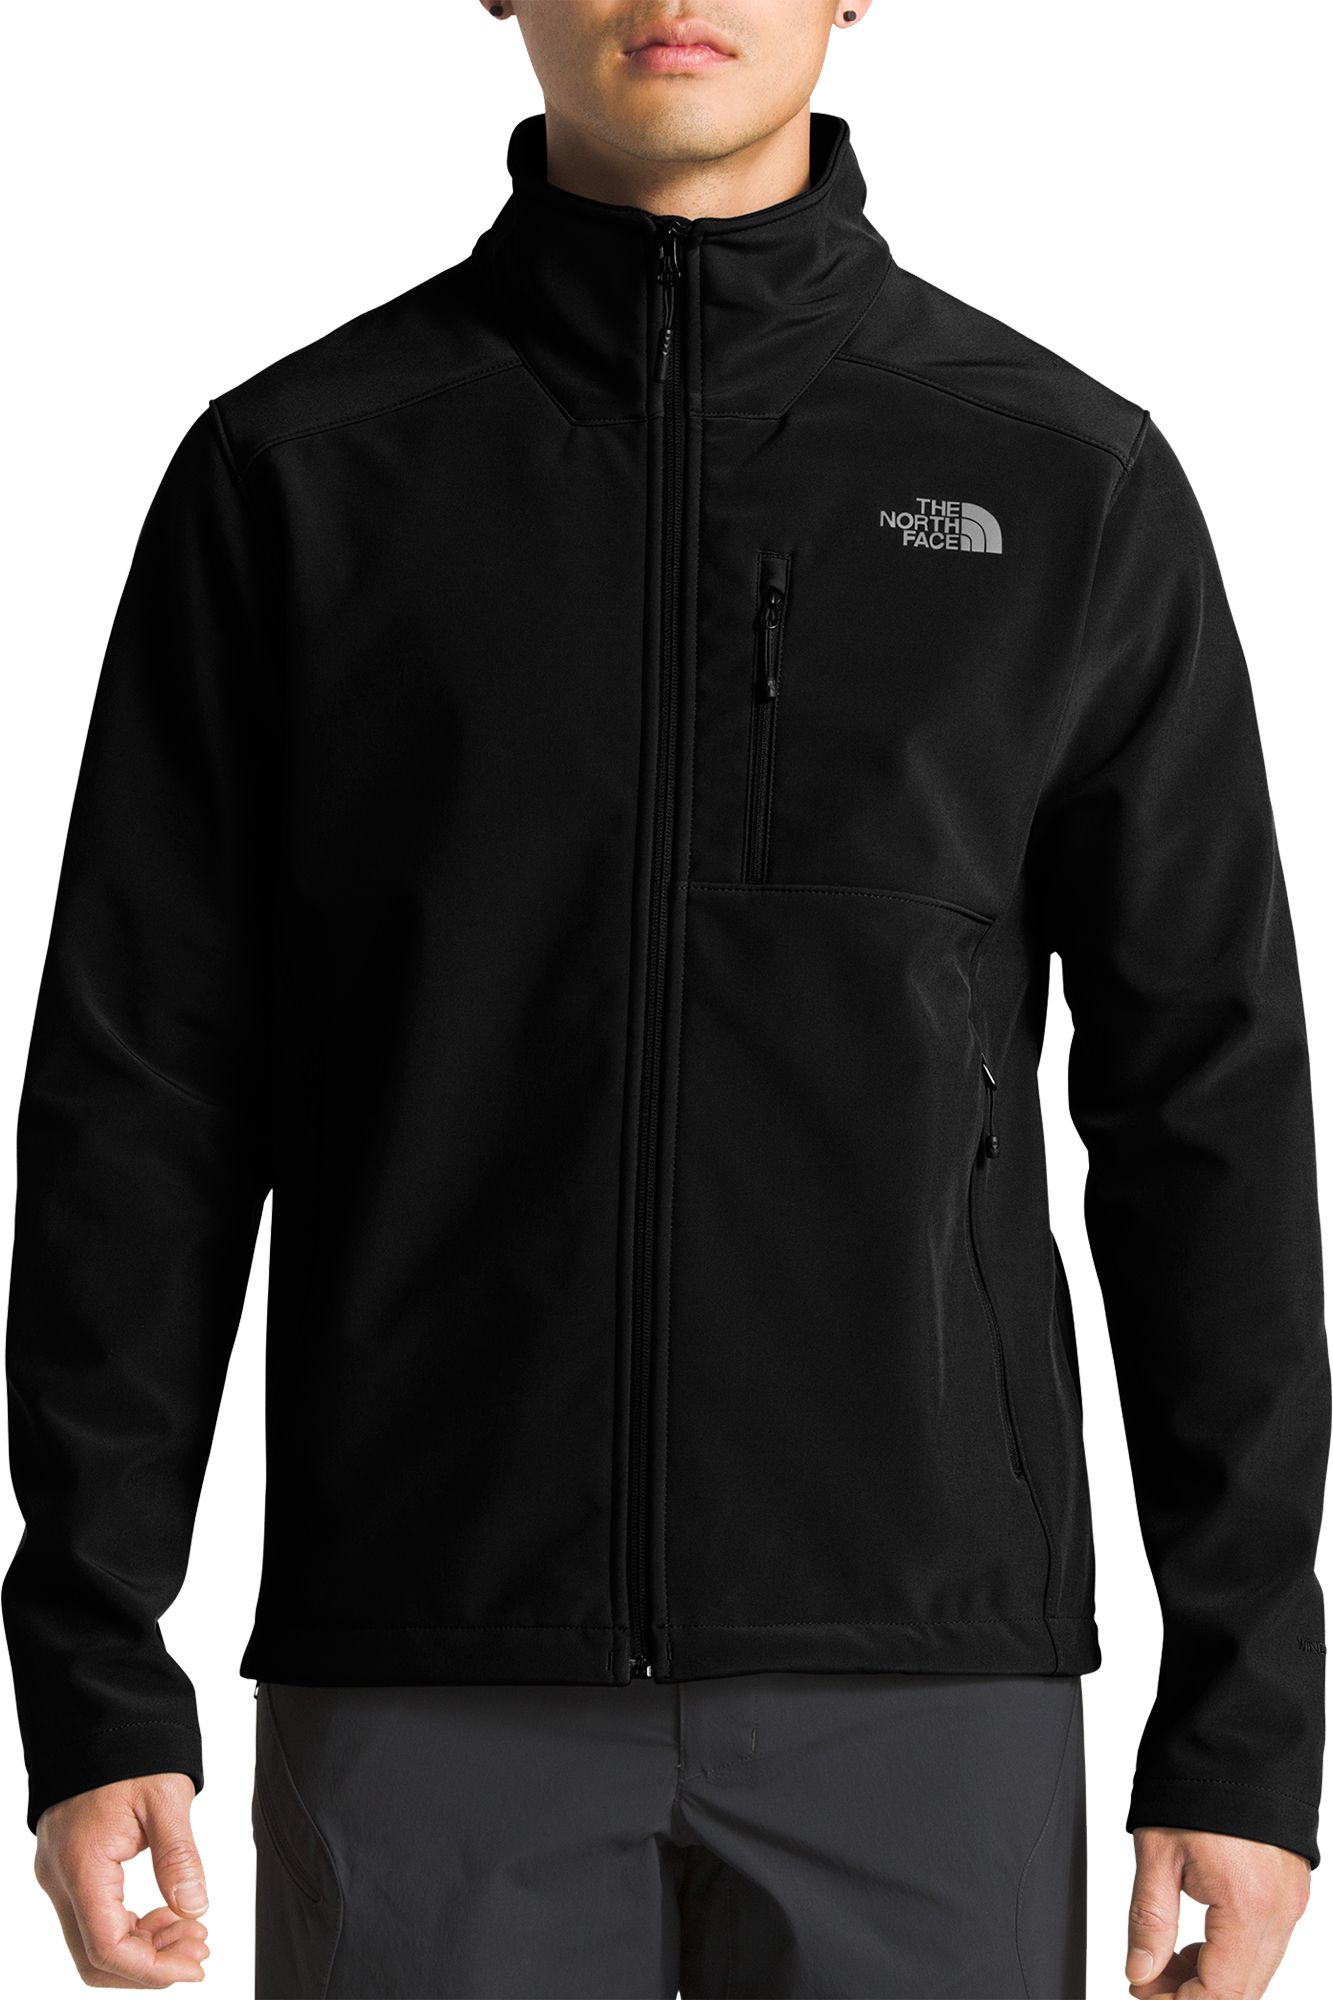 The North Face Men's Apex Bionic 2 Softshell Jacket (Regular and Big & Tall) - .97